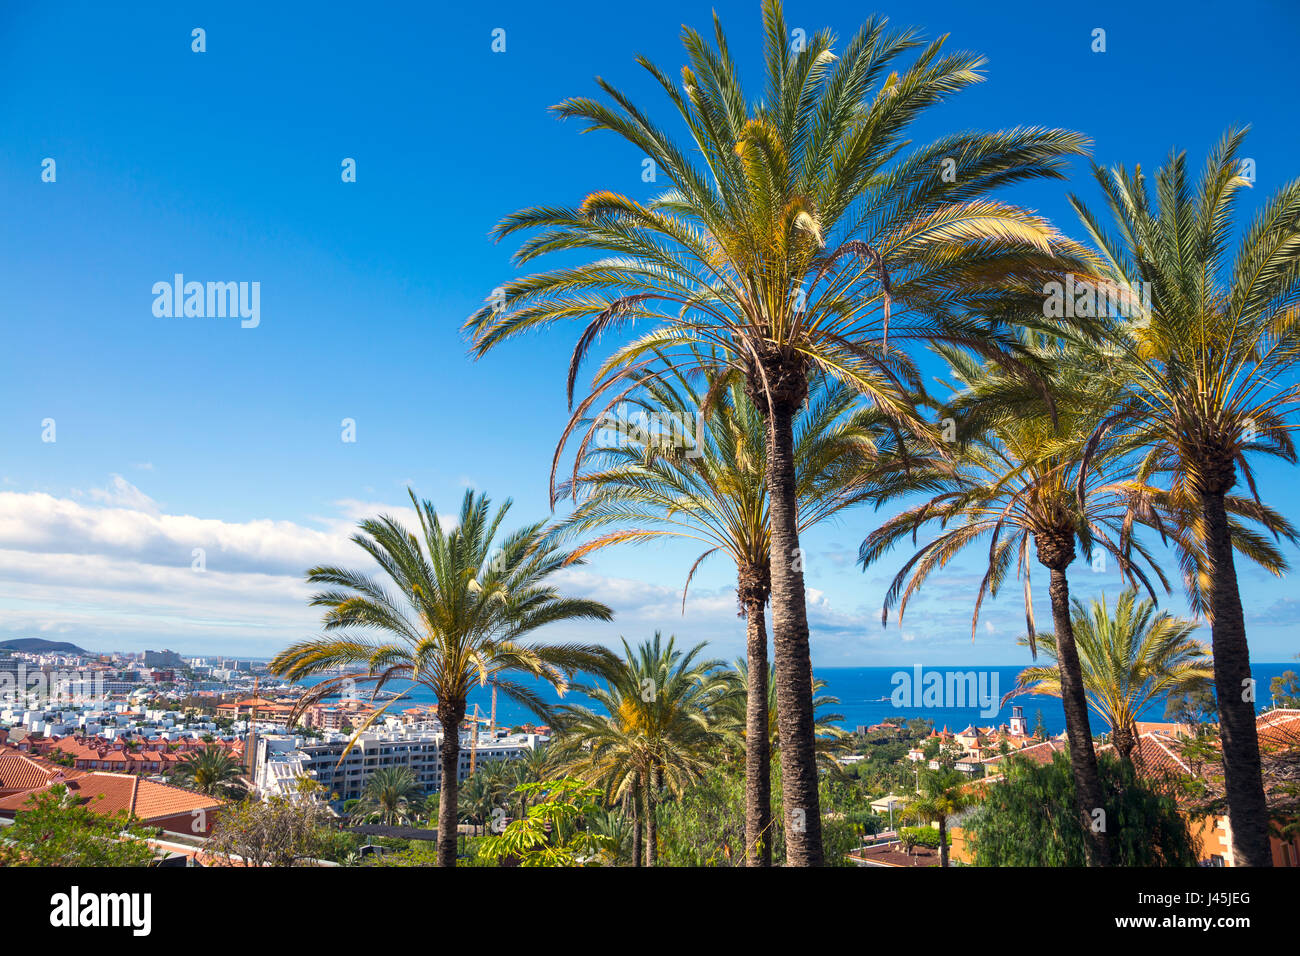 View of palm trees and the Atlantic ocean in Tenerife, Spain Stock Photo